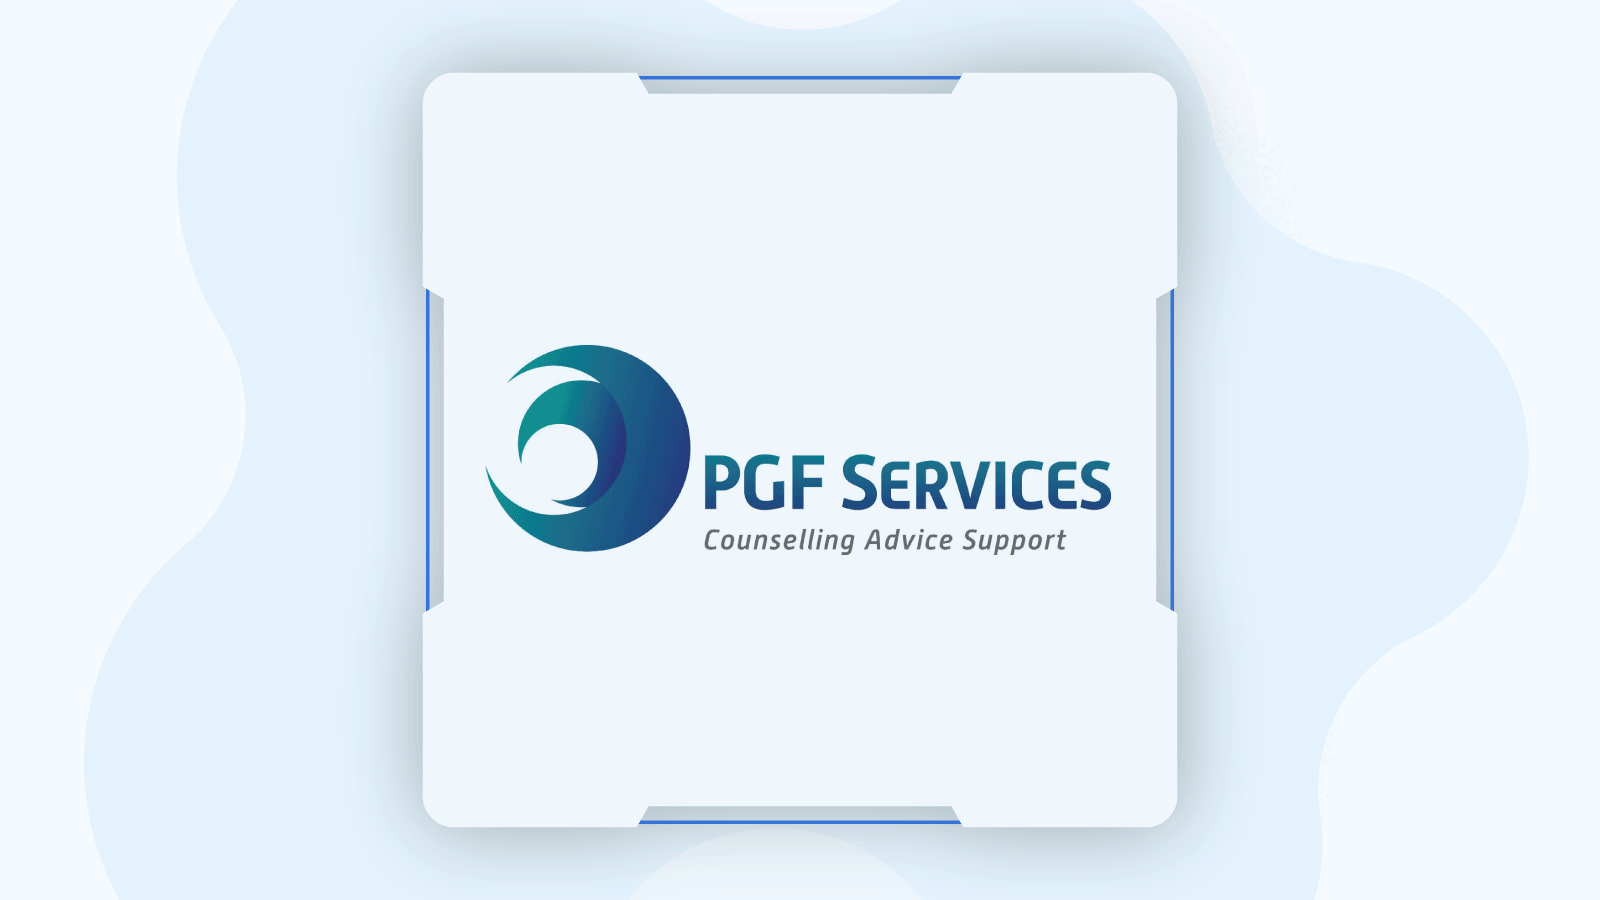 PGF Services – Counseling Advice Support